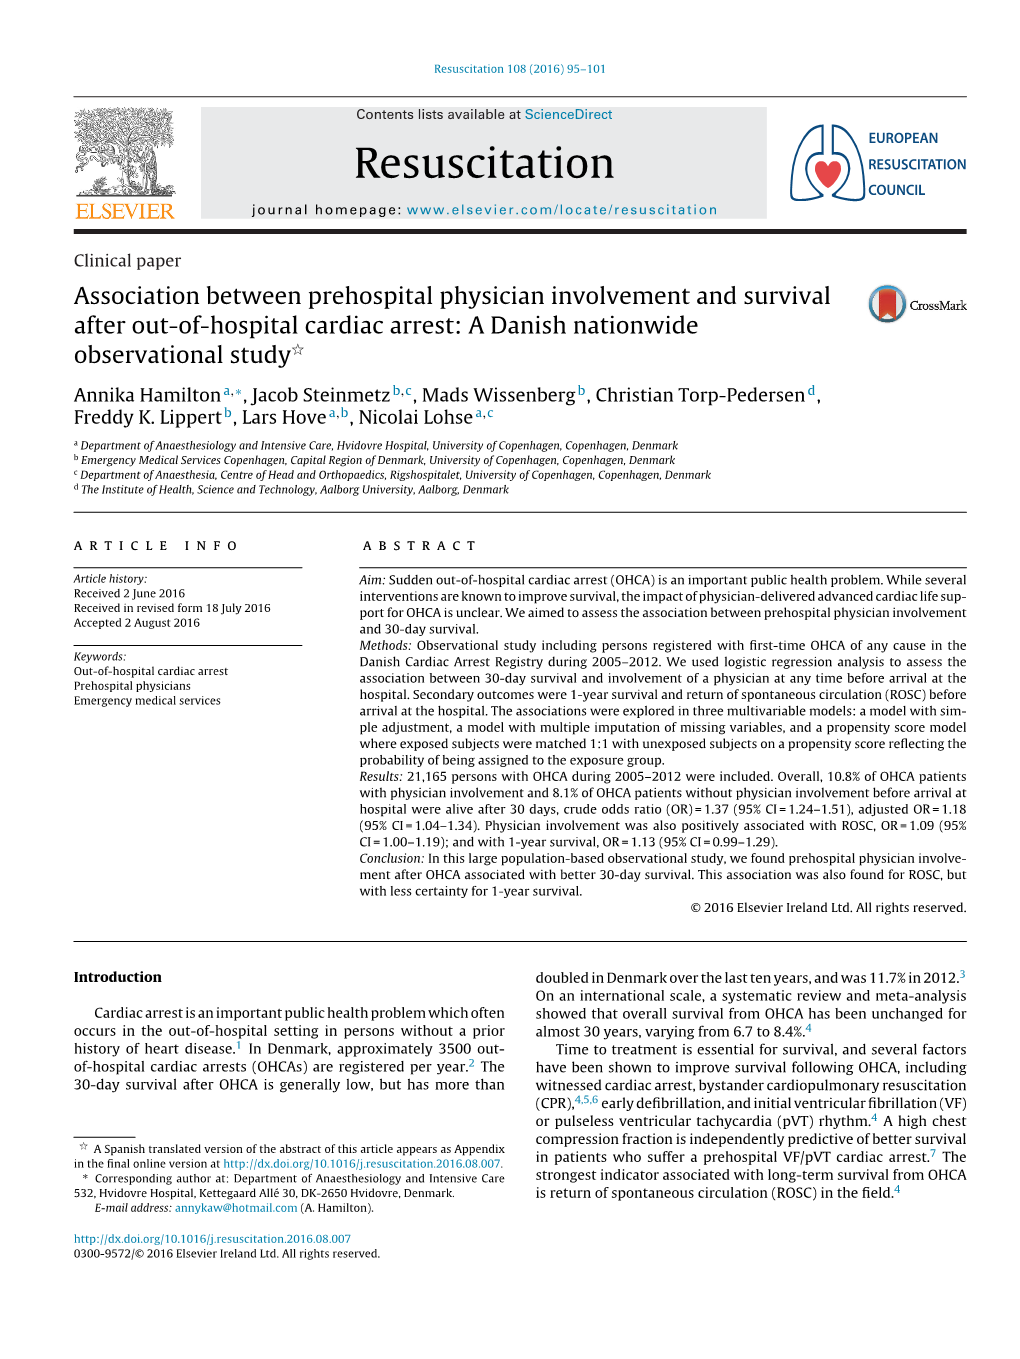 Association Between Prehospital Physician Involvement and Survival After Out-Of-Hospital Cardiac Arrest